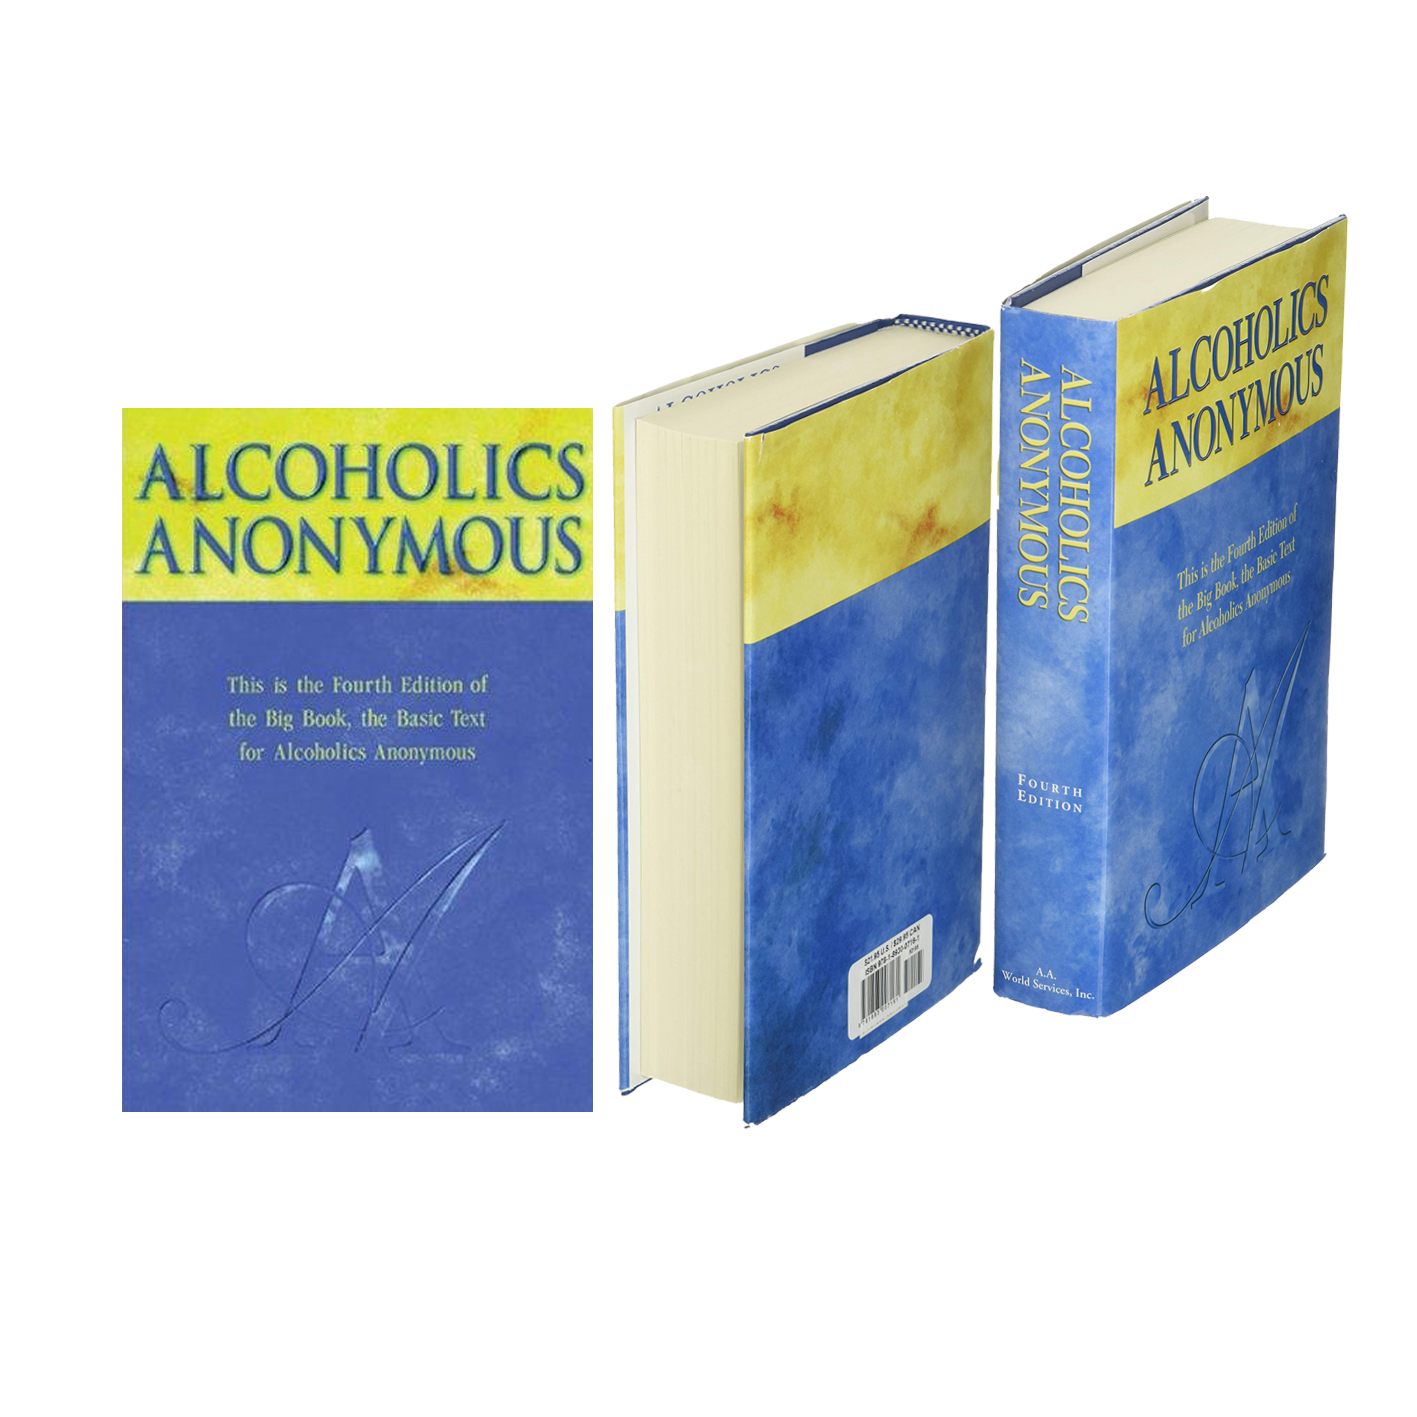 Alcoholics Anonymous (The Big Book) Hardcover Edition